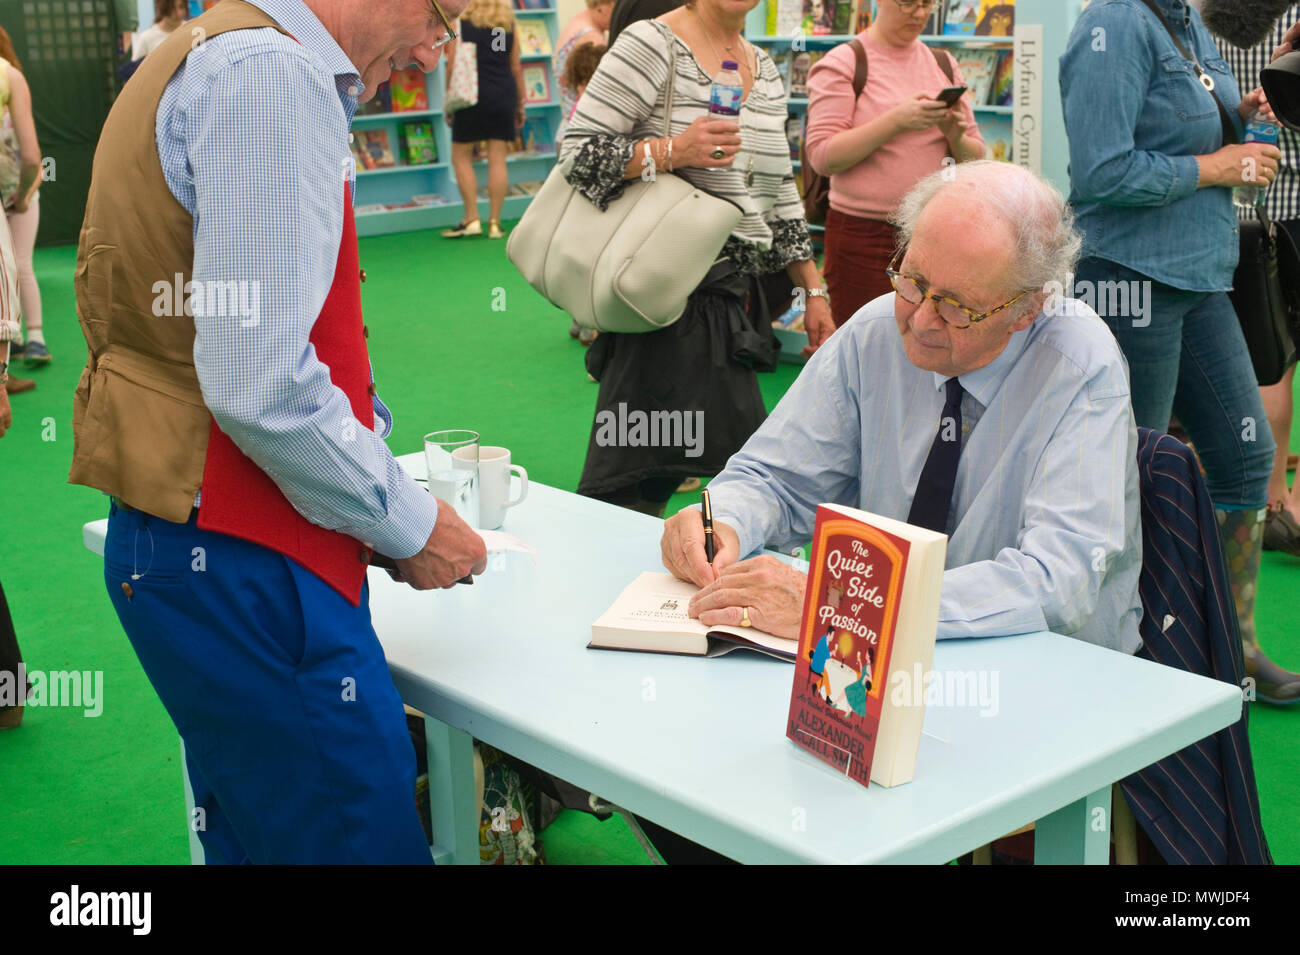 Alexander McCall Smith signing books for fans in the bookshop at Hay Festival 2018 Hay-on-Wye Powys Wales UK Stock Photo